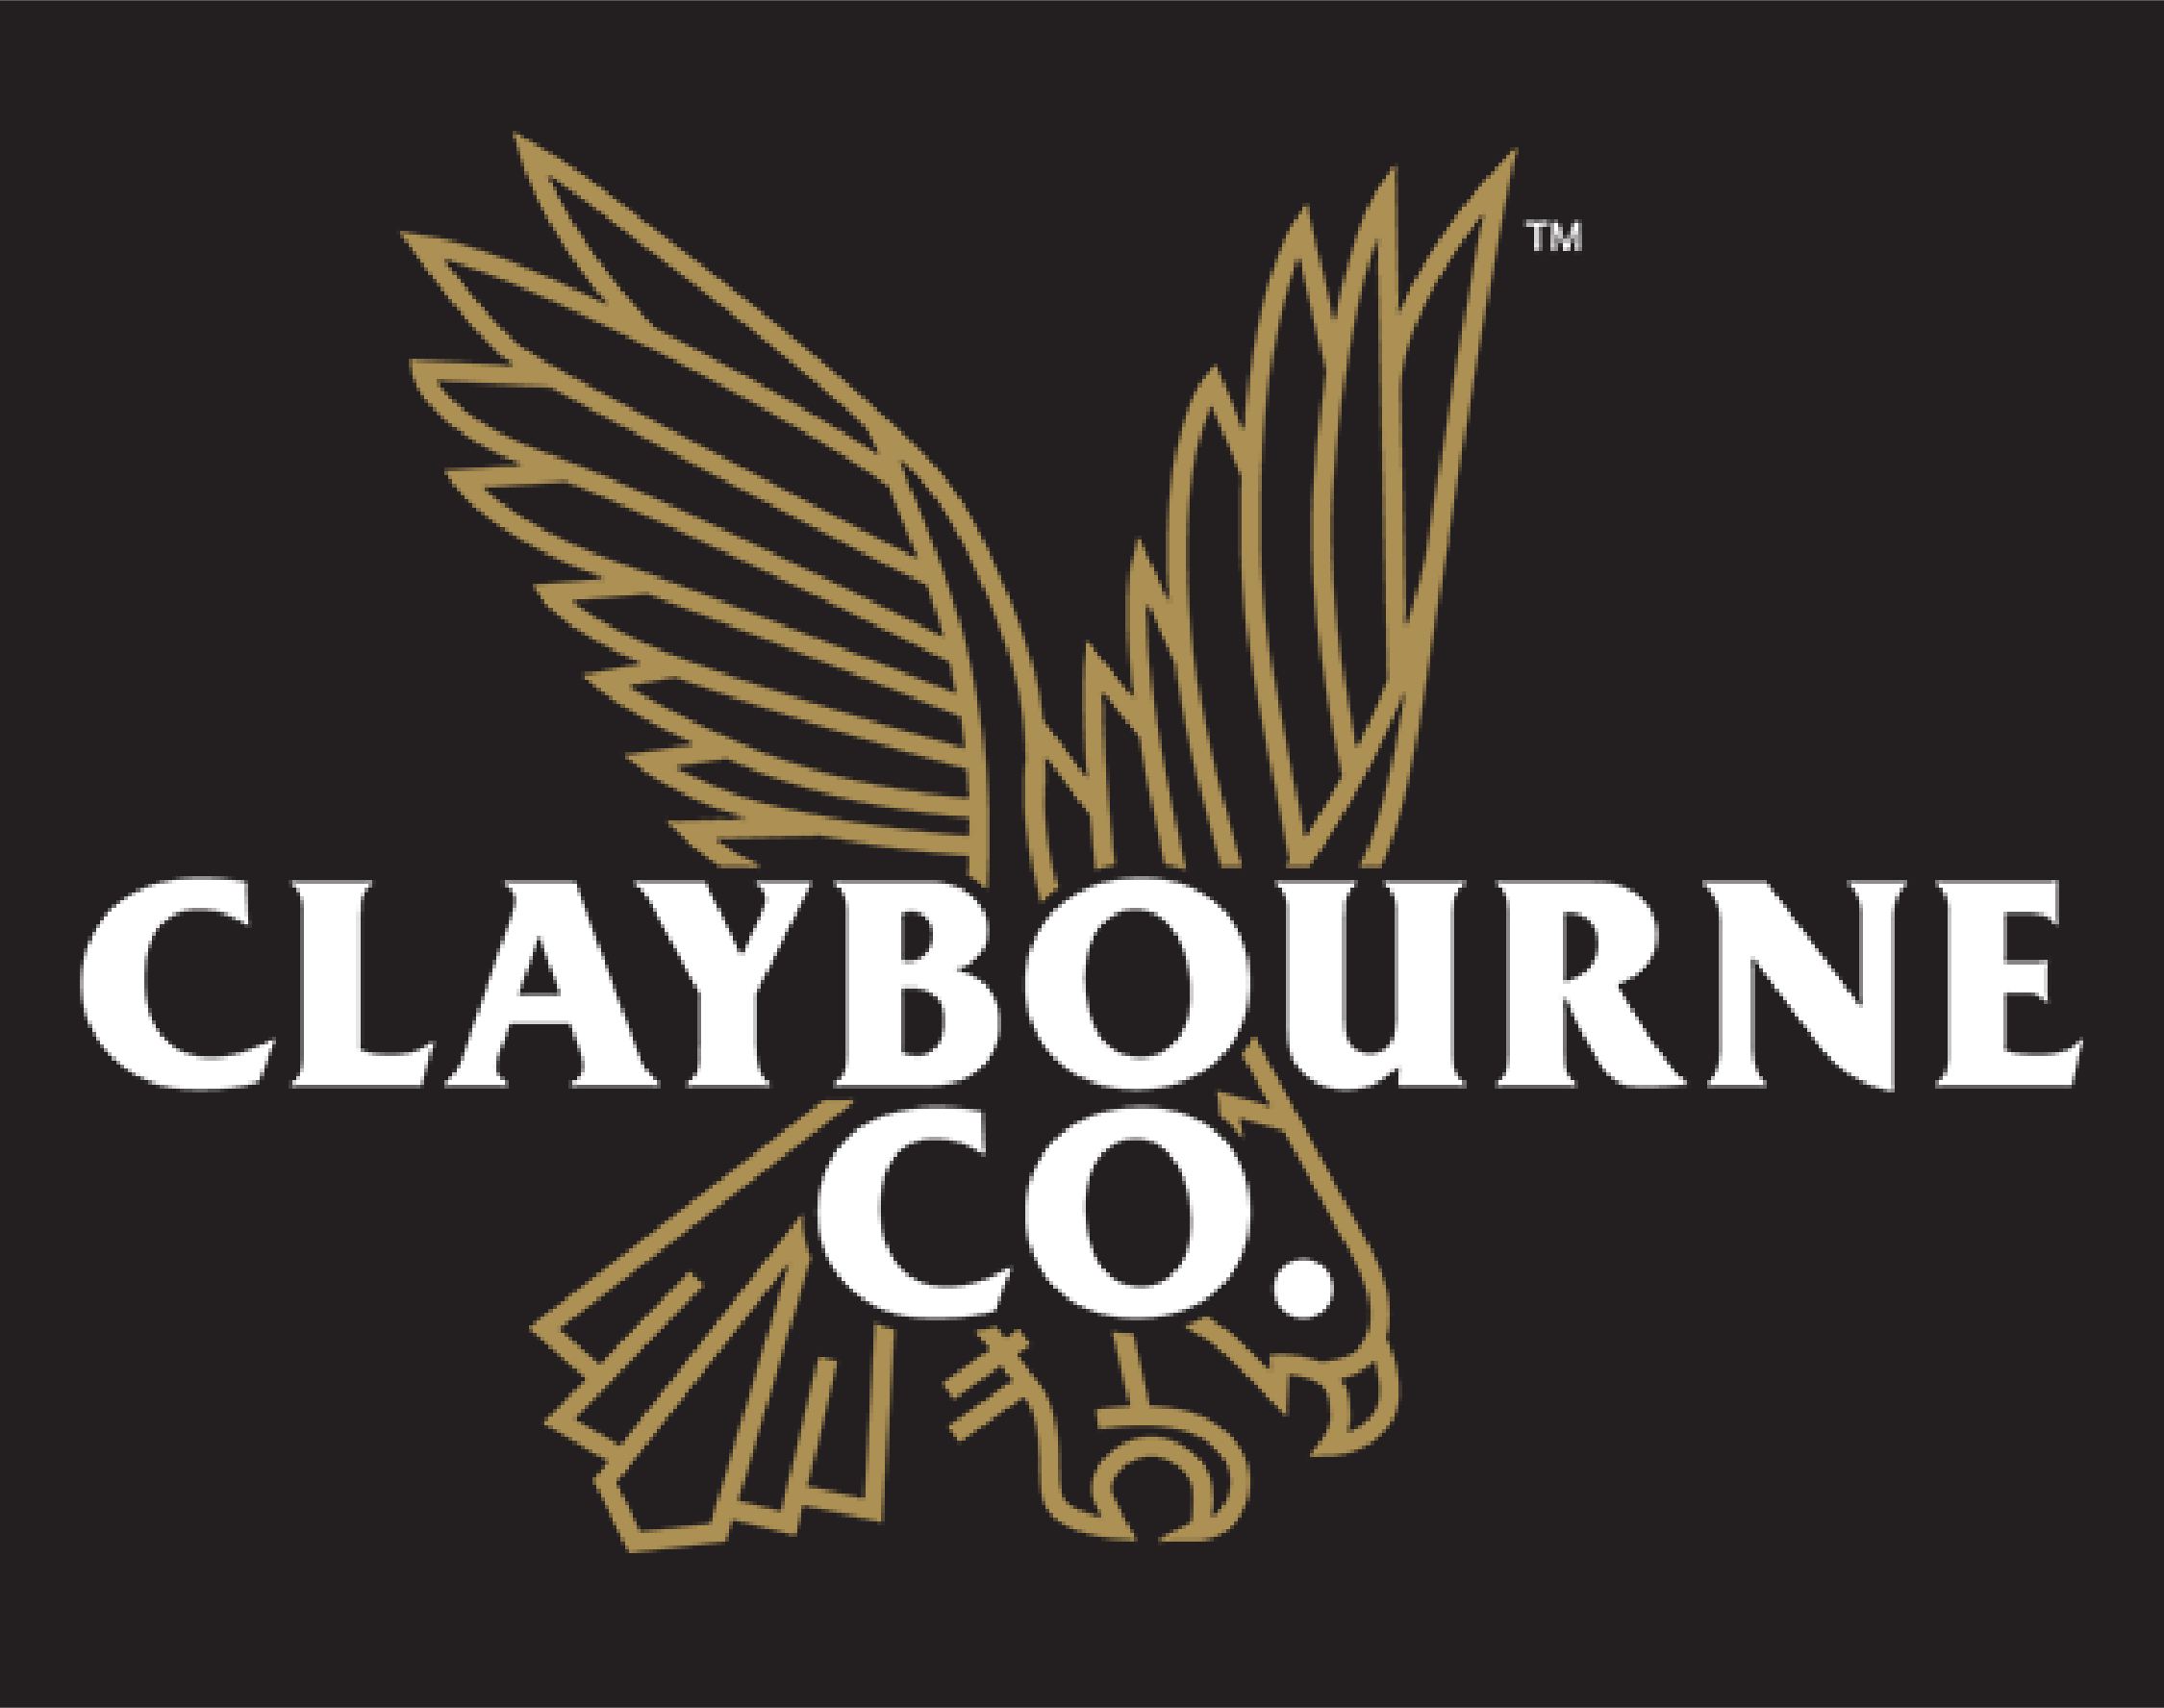 Co-Founder & CEO at Claybourne Premium